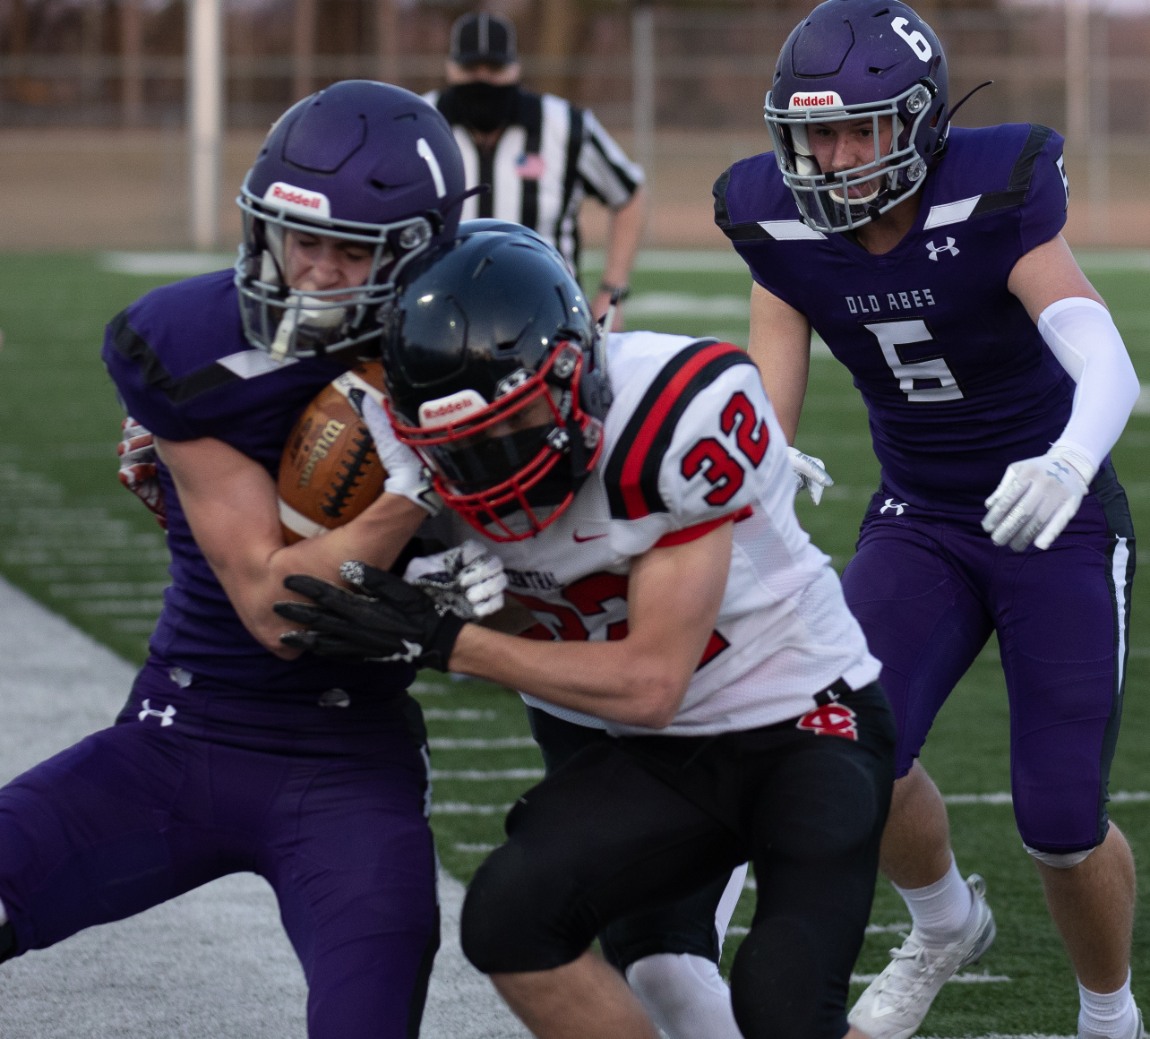 Eau-Claire-Memorial-JV-Football-LaCrosse-Central-at-Home-3-29-21-1577